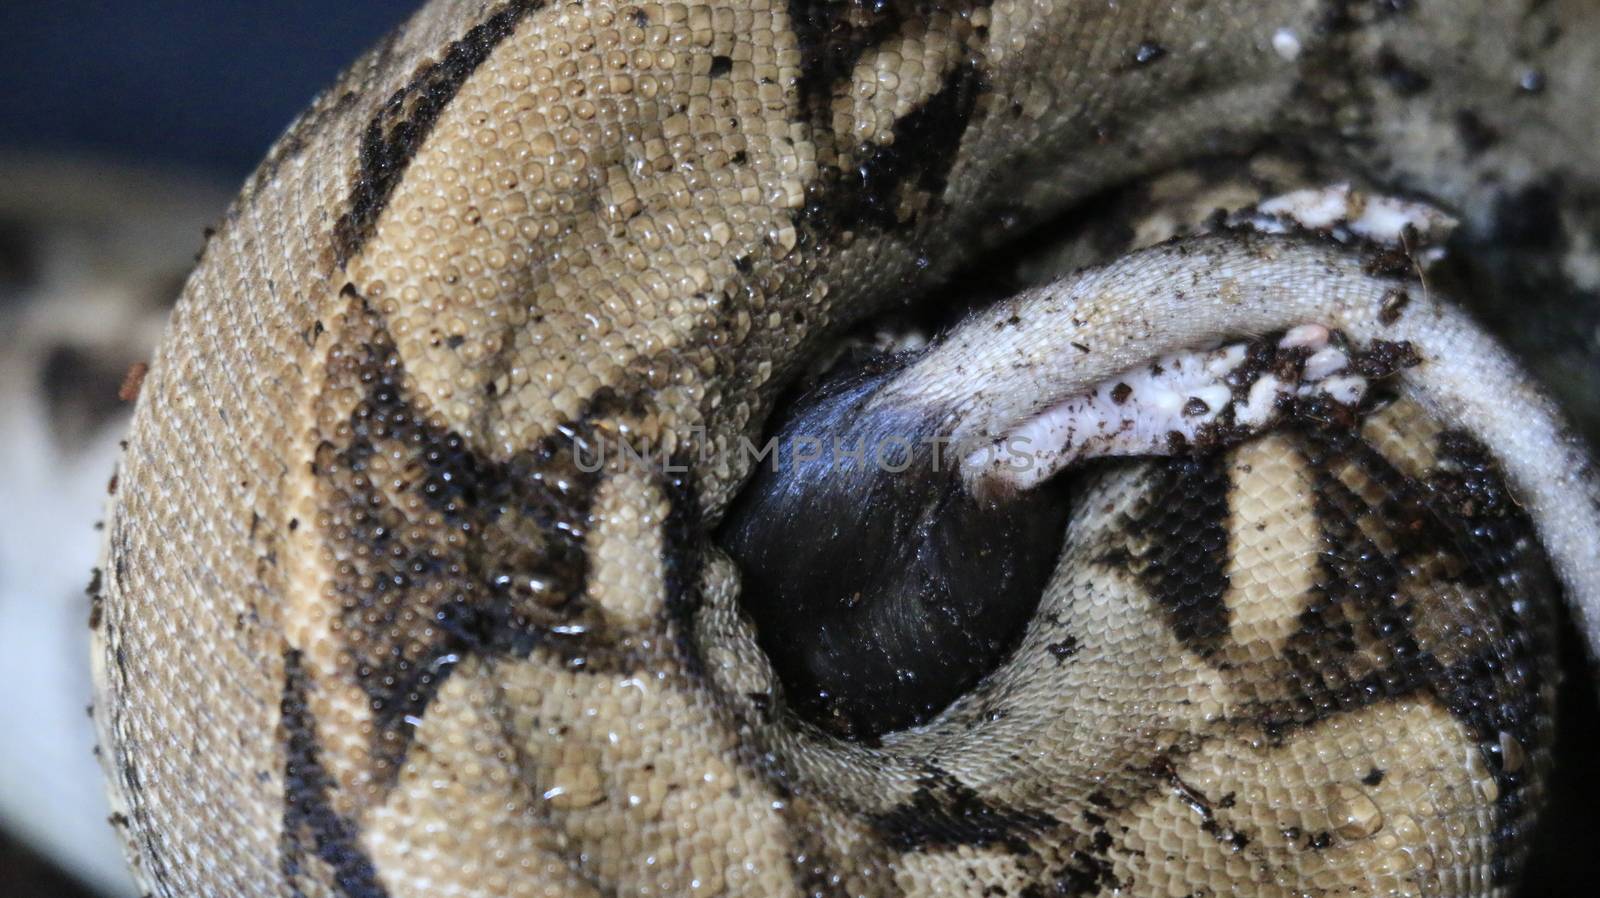 Boa constrictor constricts a rat and swallows it. High quality photo